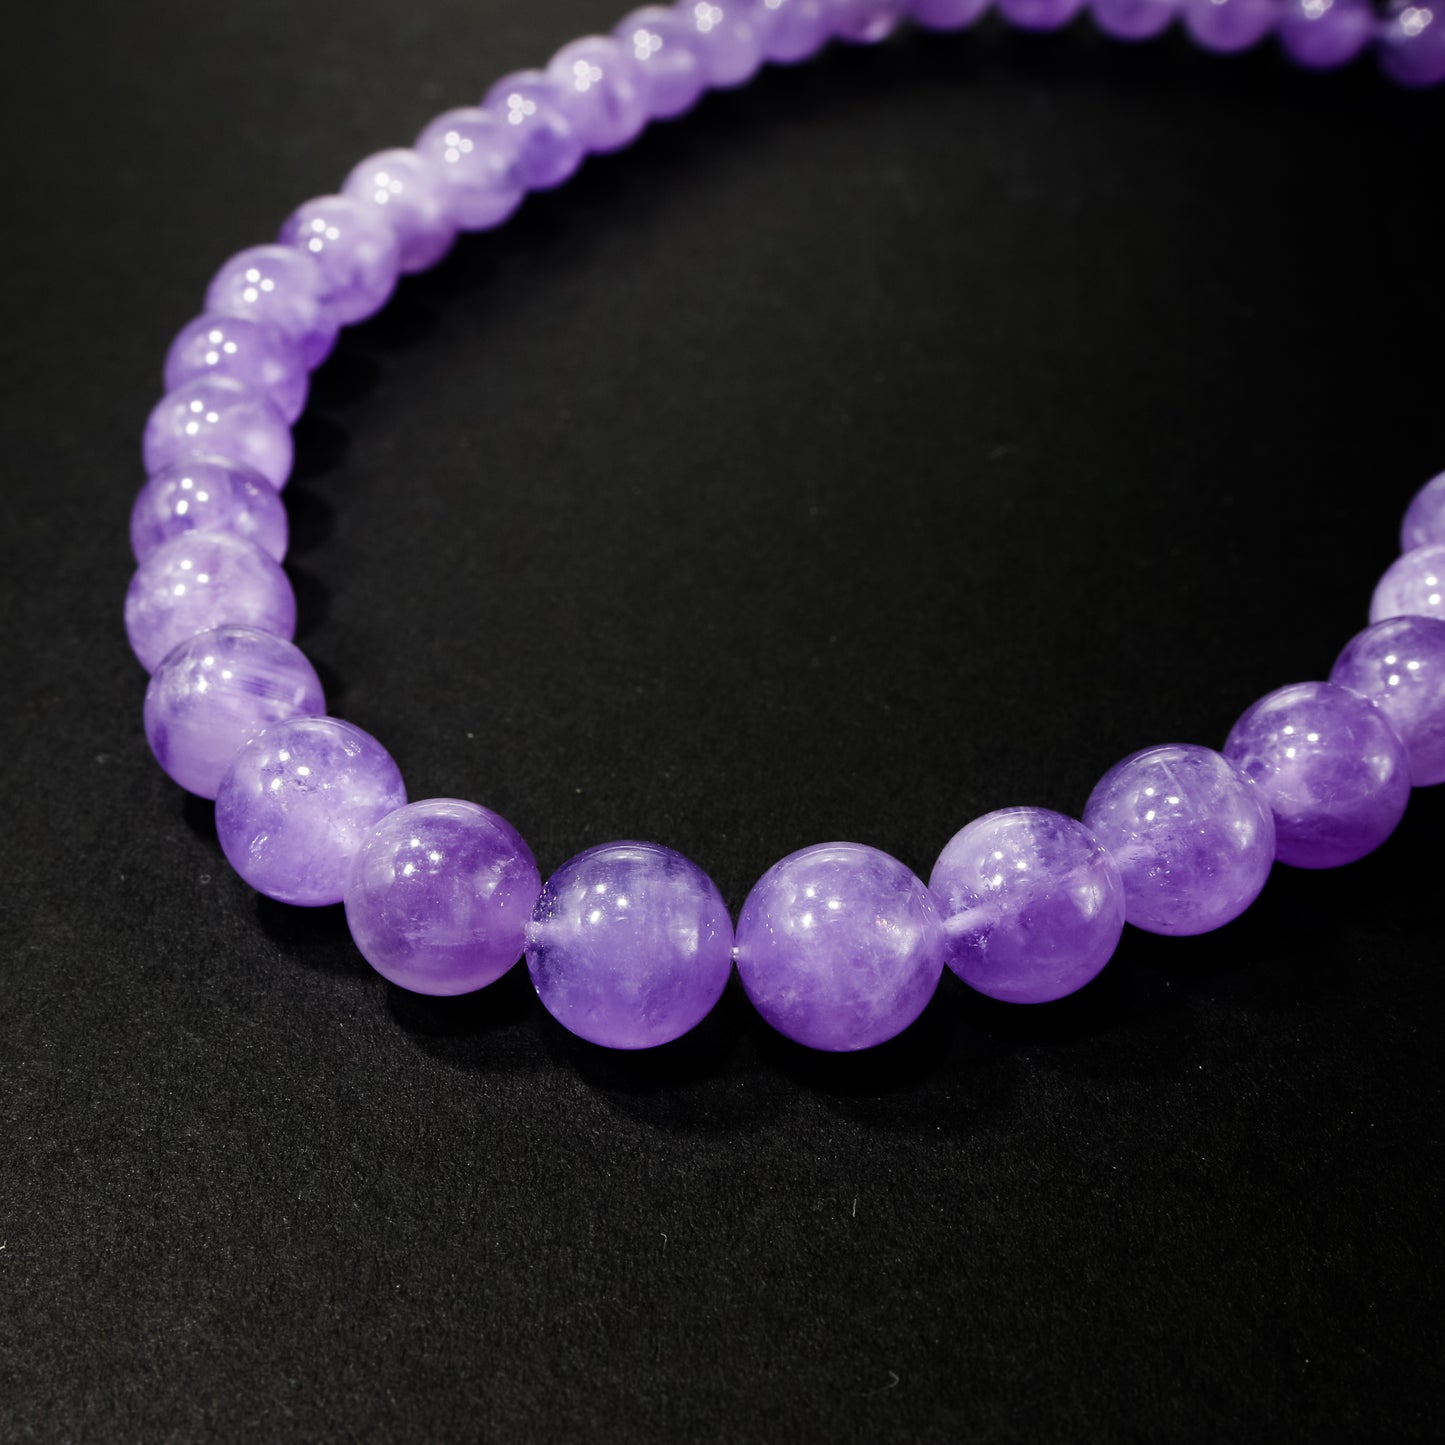 Crystal healing Lavender necklace known for helping align body, mind and spirit